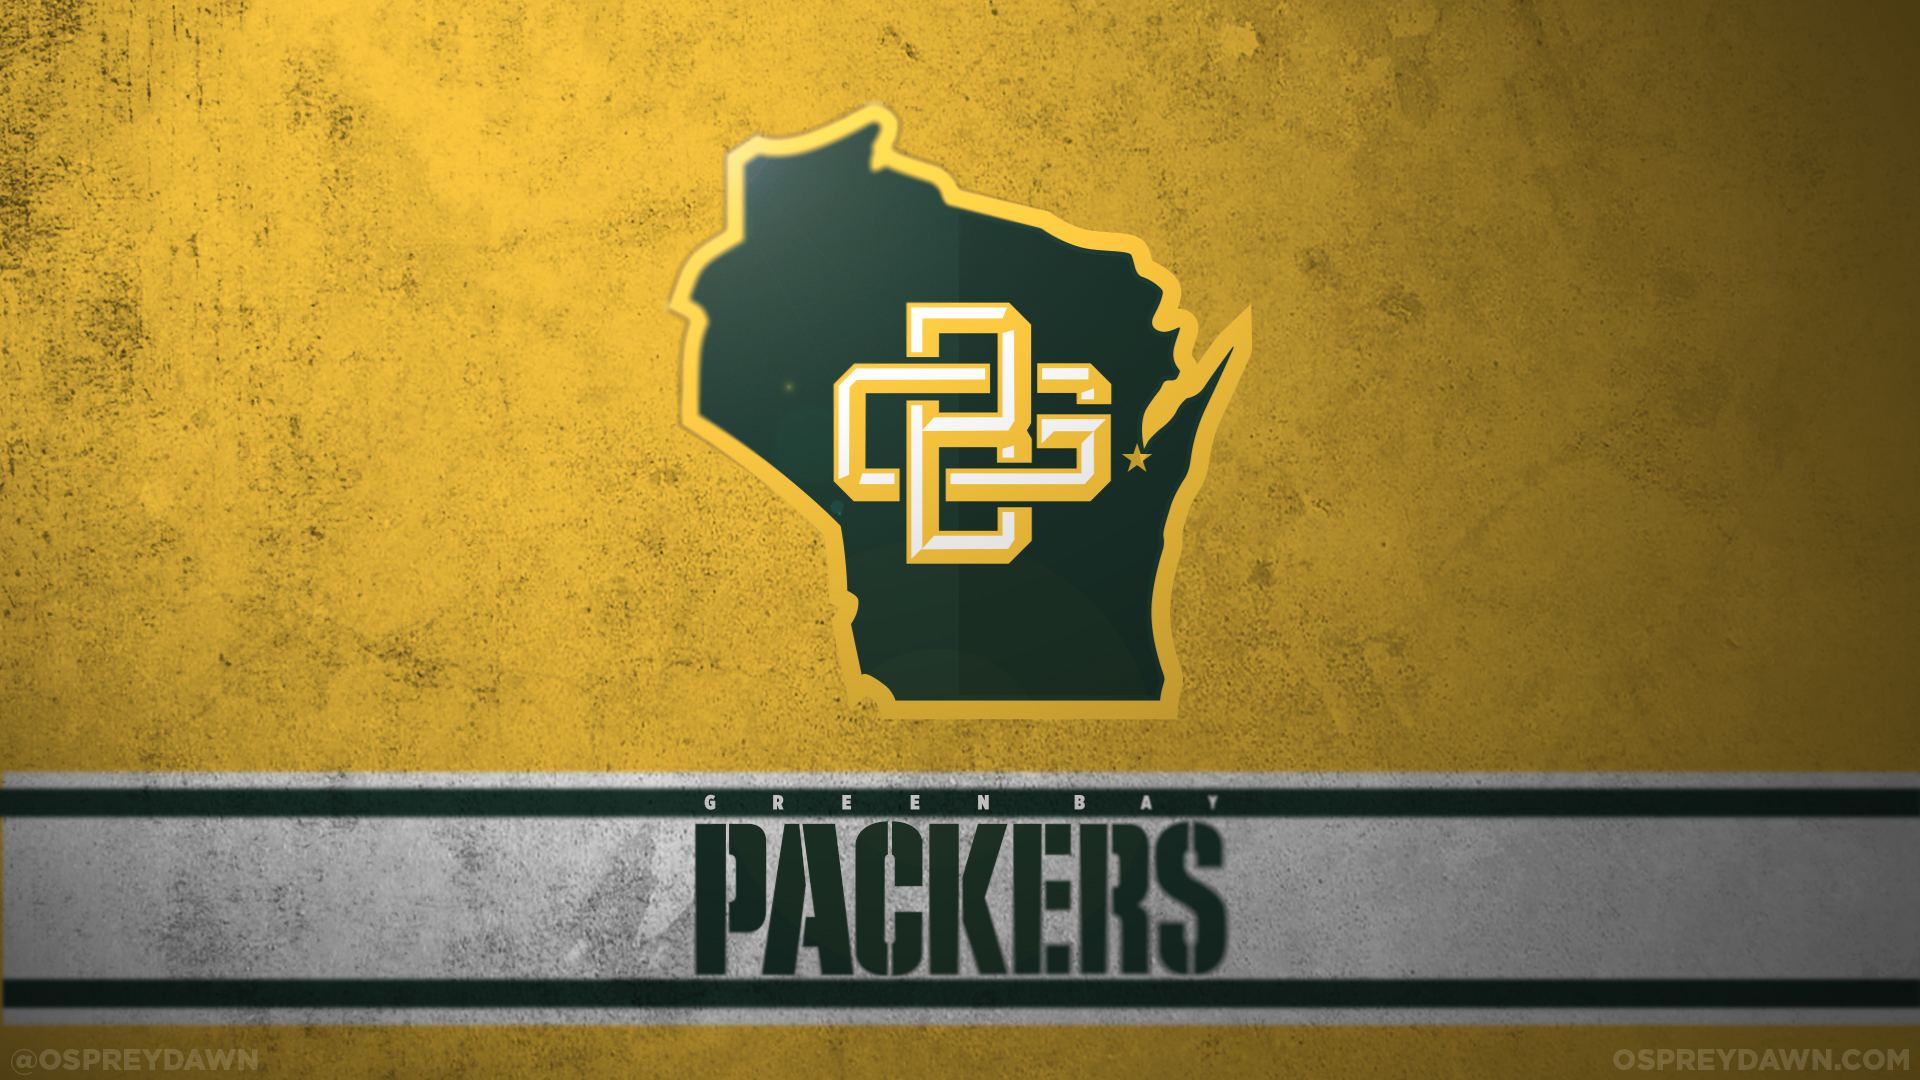 Green Bay Packers wallpaper hd free download